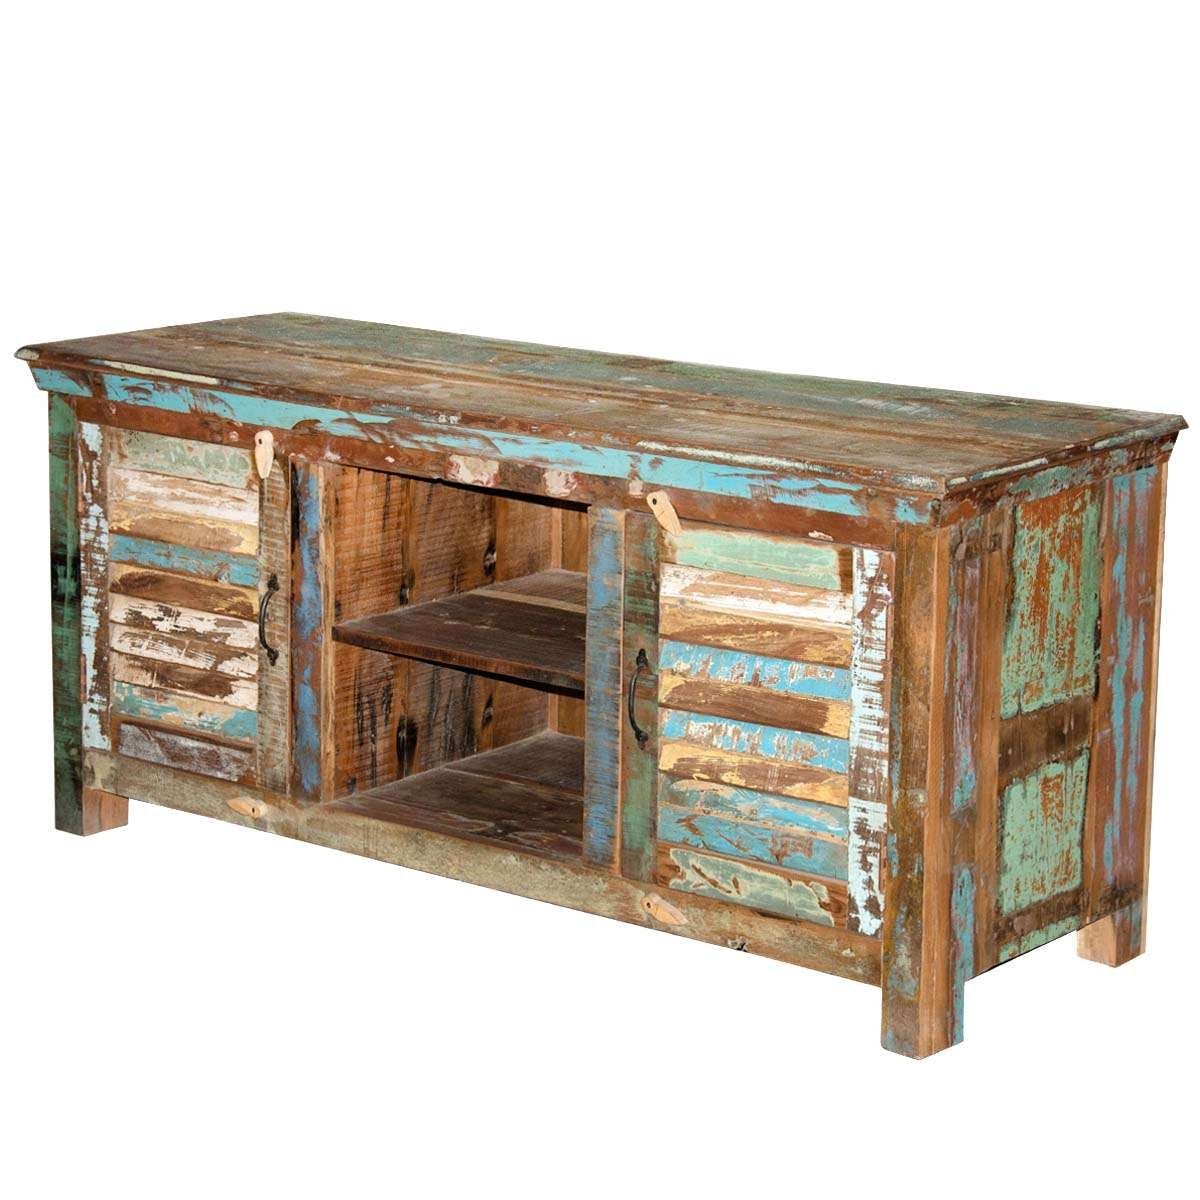 Rustic Shutter Doors Reclaimed Wood Tv Stand Media Console Inside Recycled Wood Tv Stands (View 1 of 15)